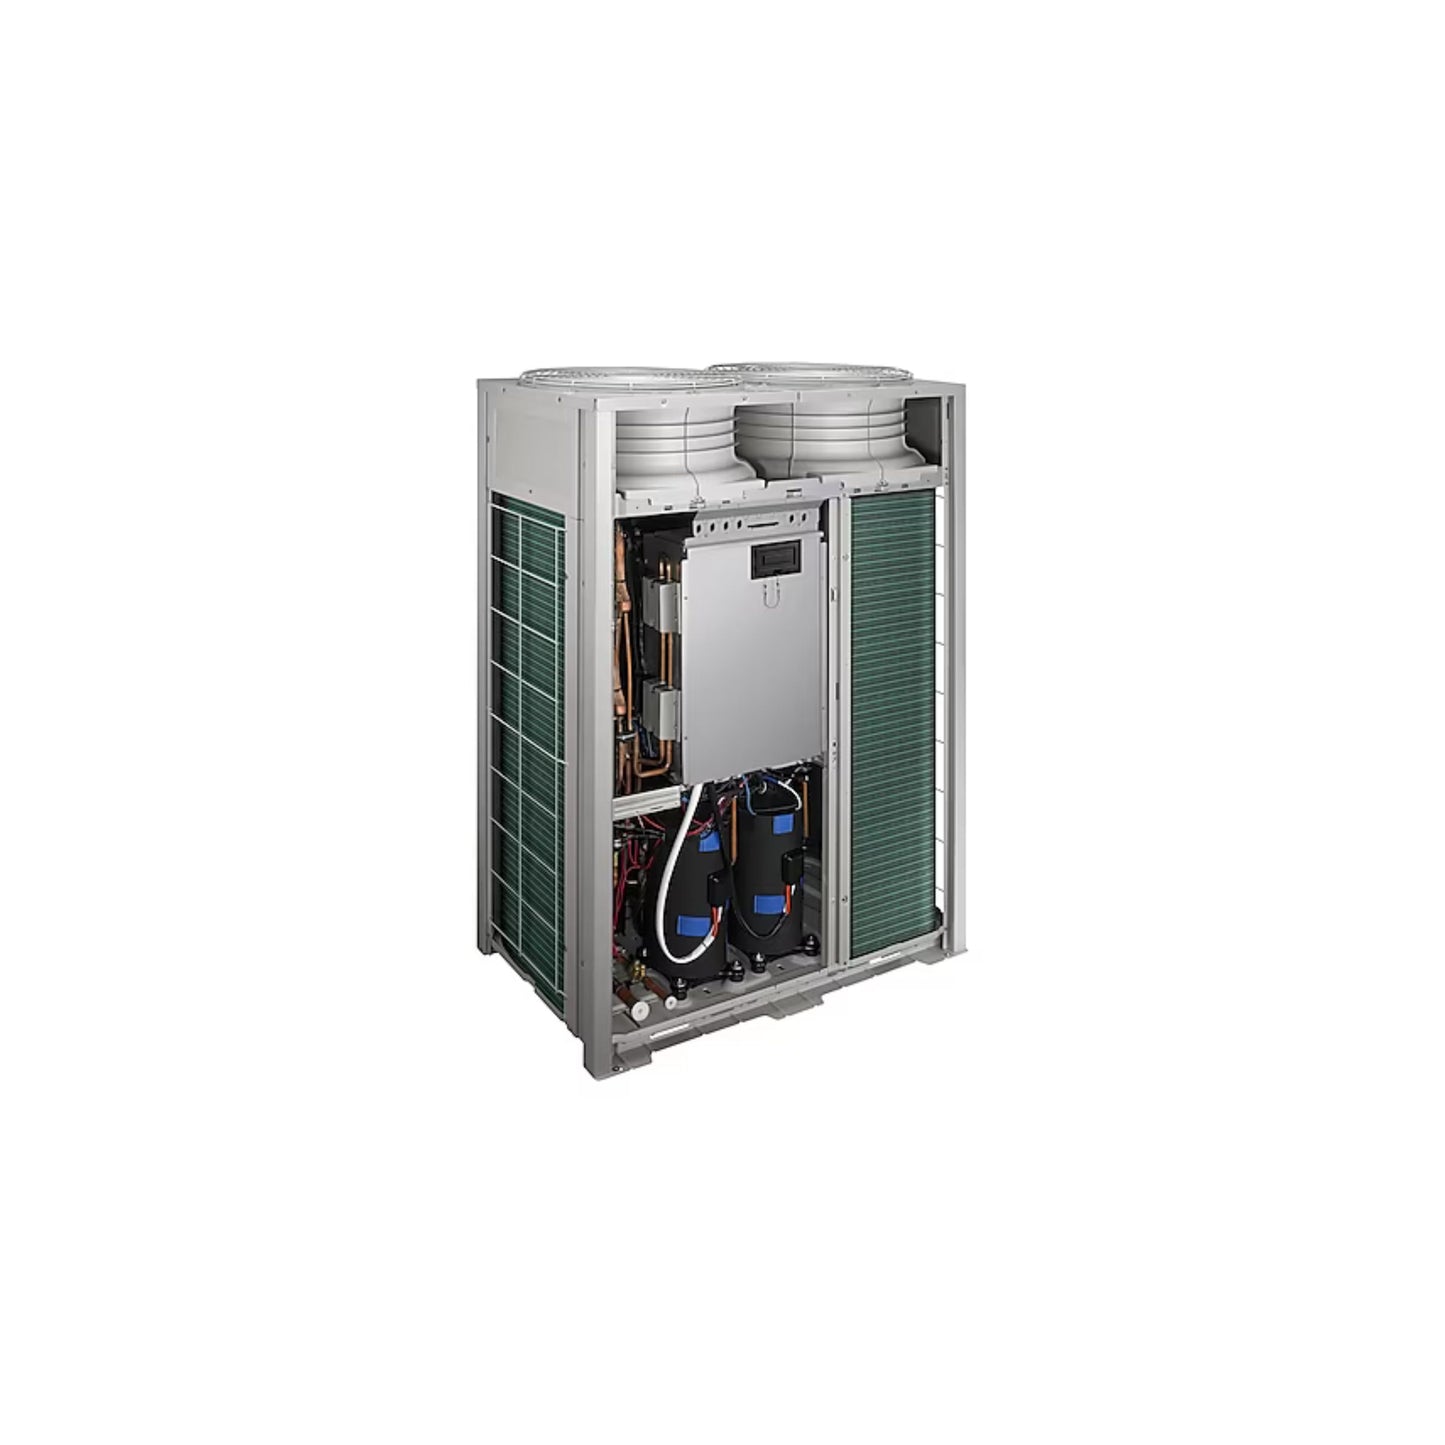 Samsung DVM S2 Standard Cooling Only Outdoor Unit Back View